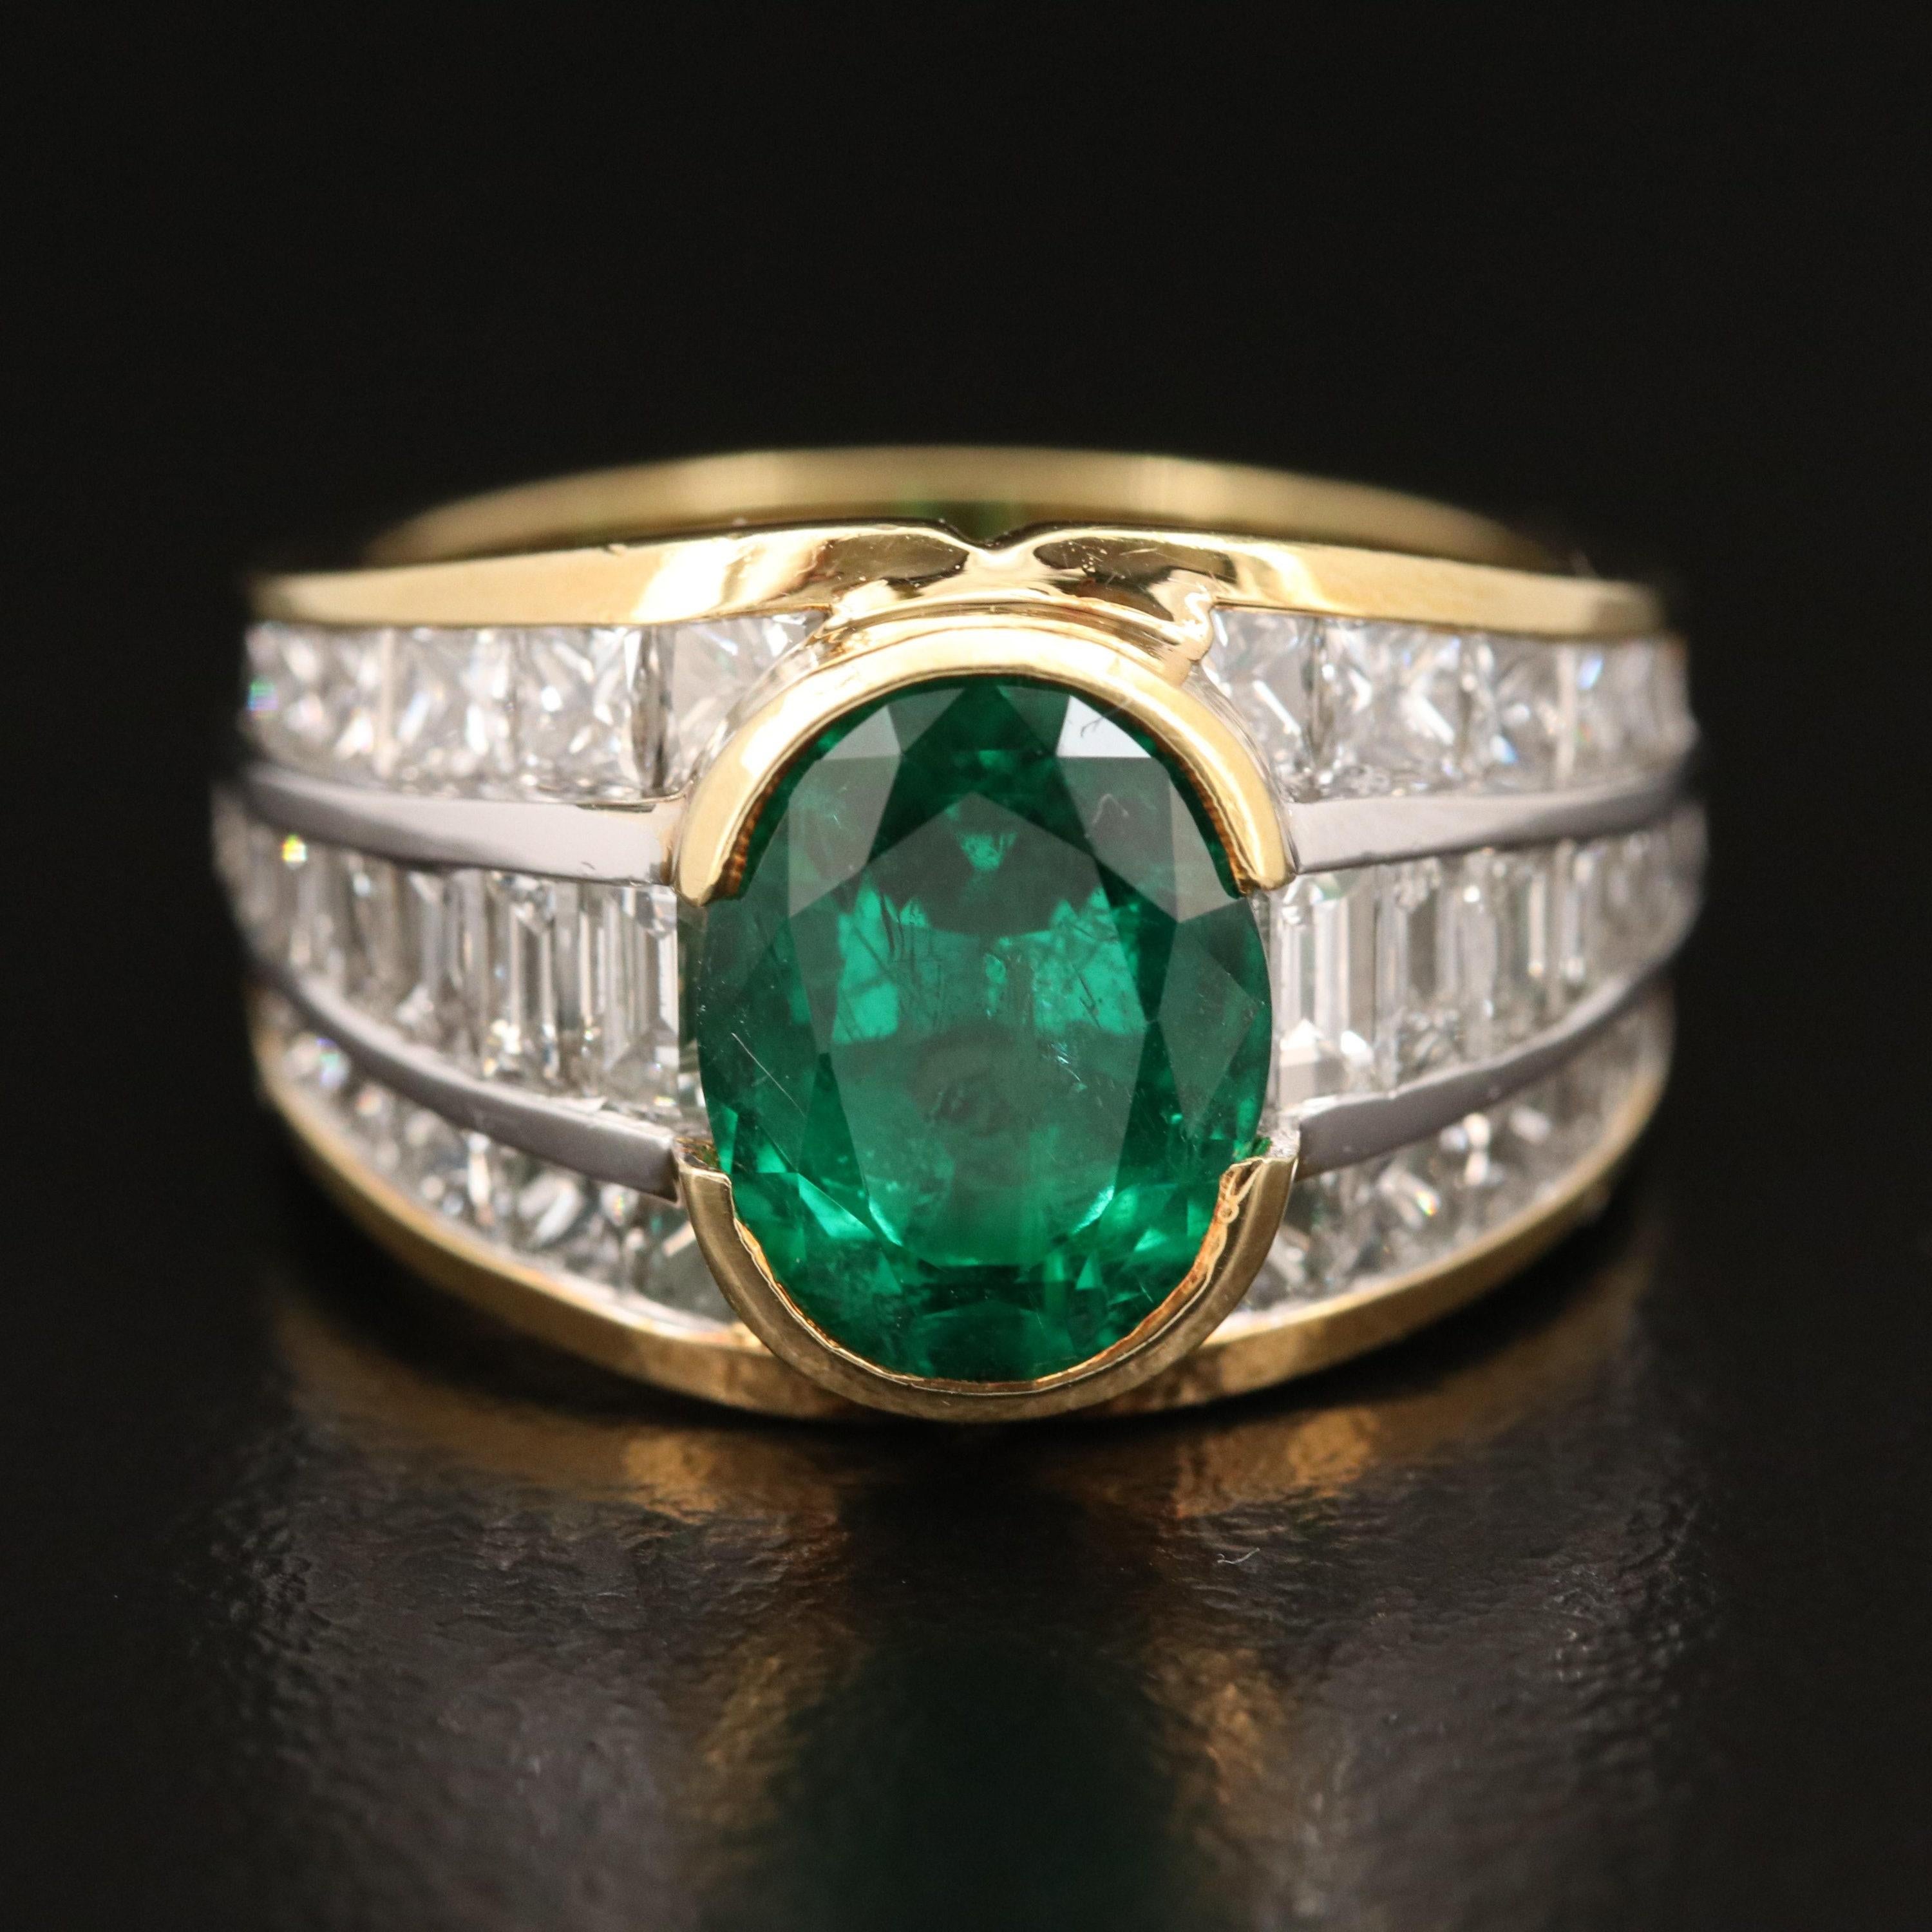 For Sale:  2.5 Carat Oval Cut Emerald Engagement Ring, Natural Emerald Diamond Wedding Band 6